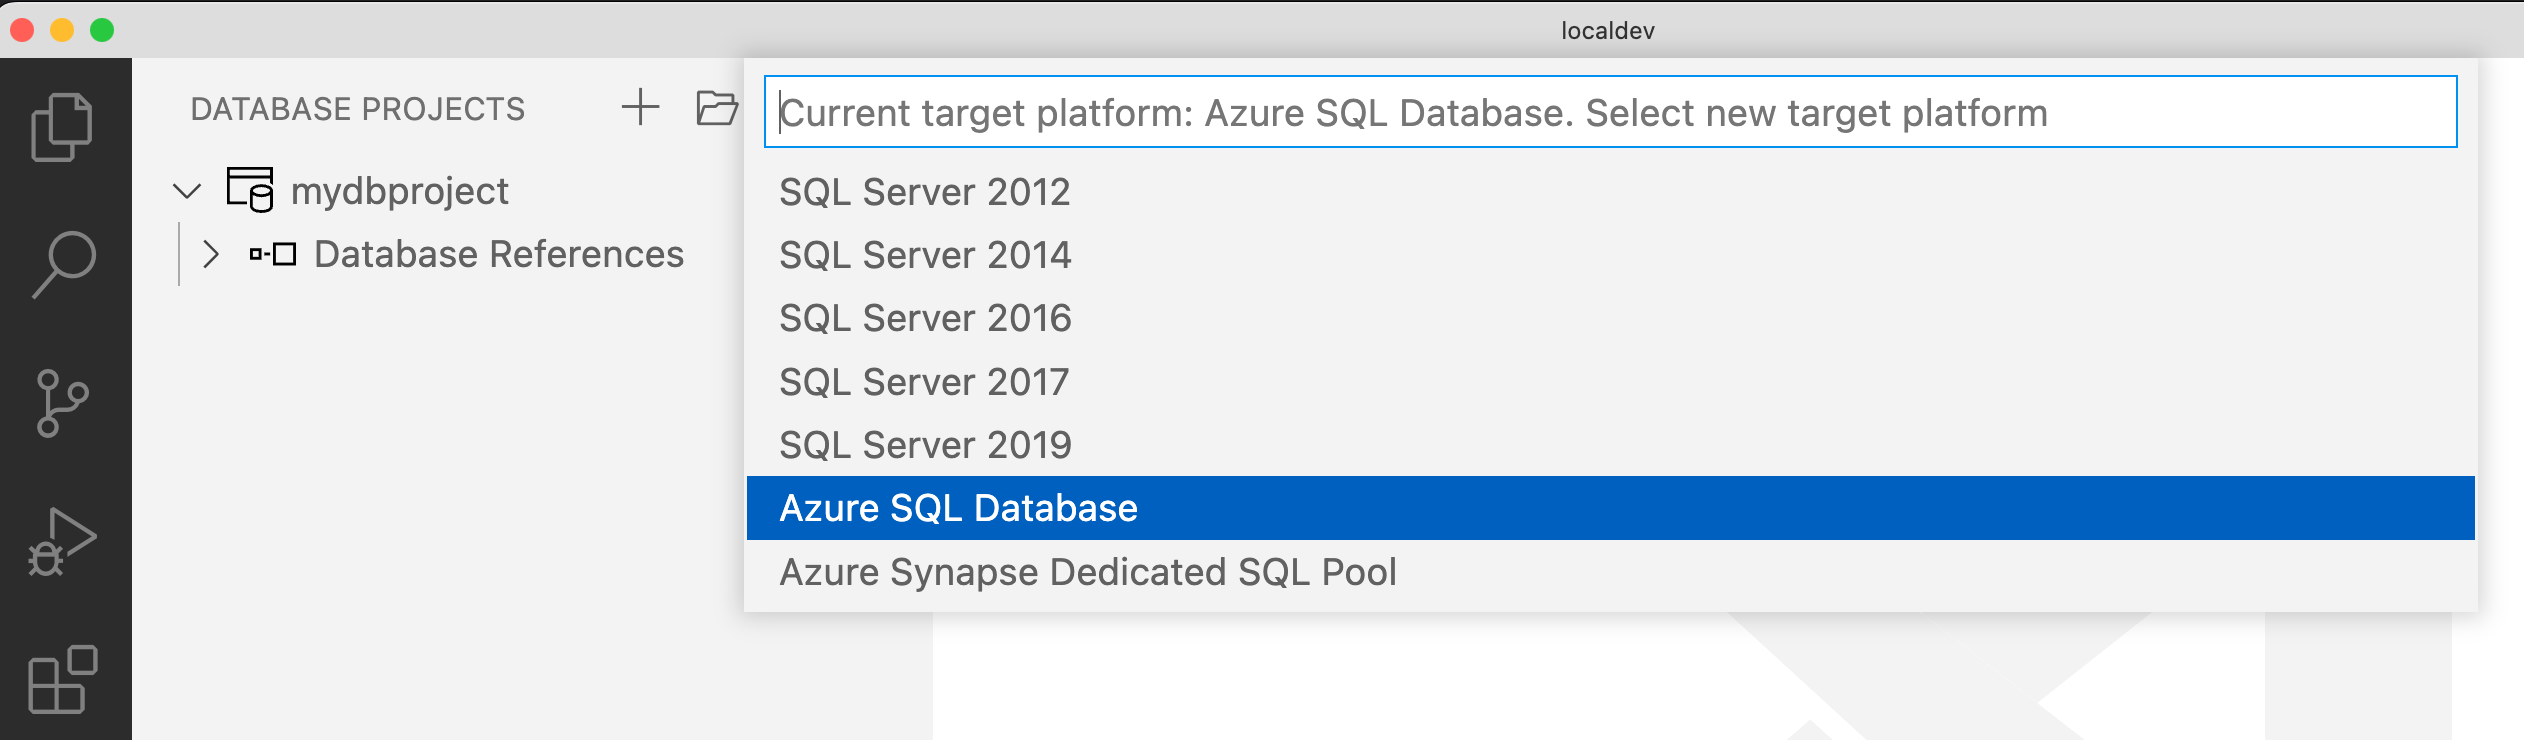 Screenshot of selecting Azure SQL Database as a target for a Database Project.